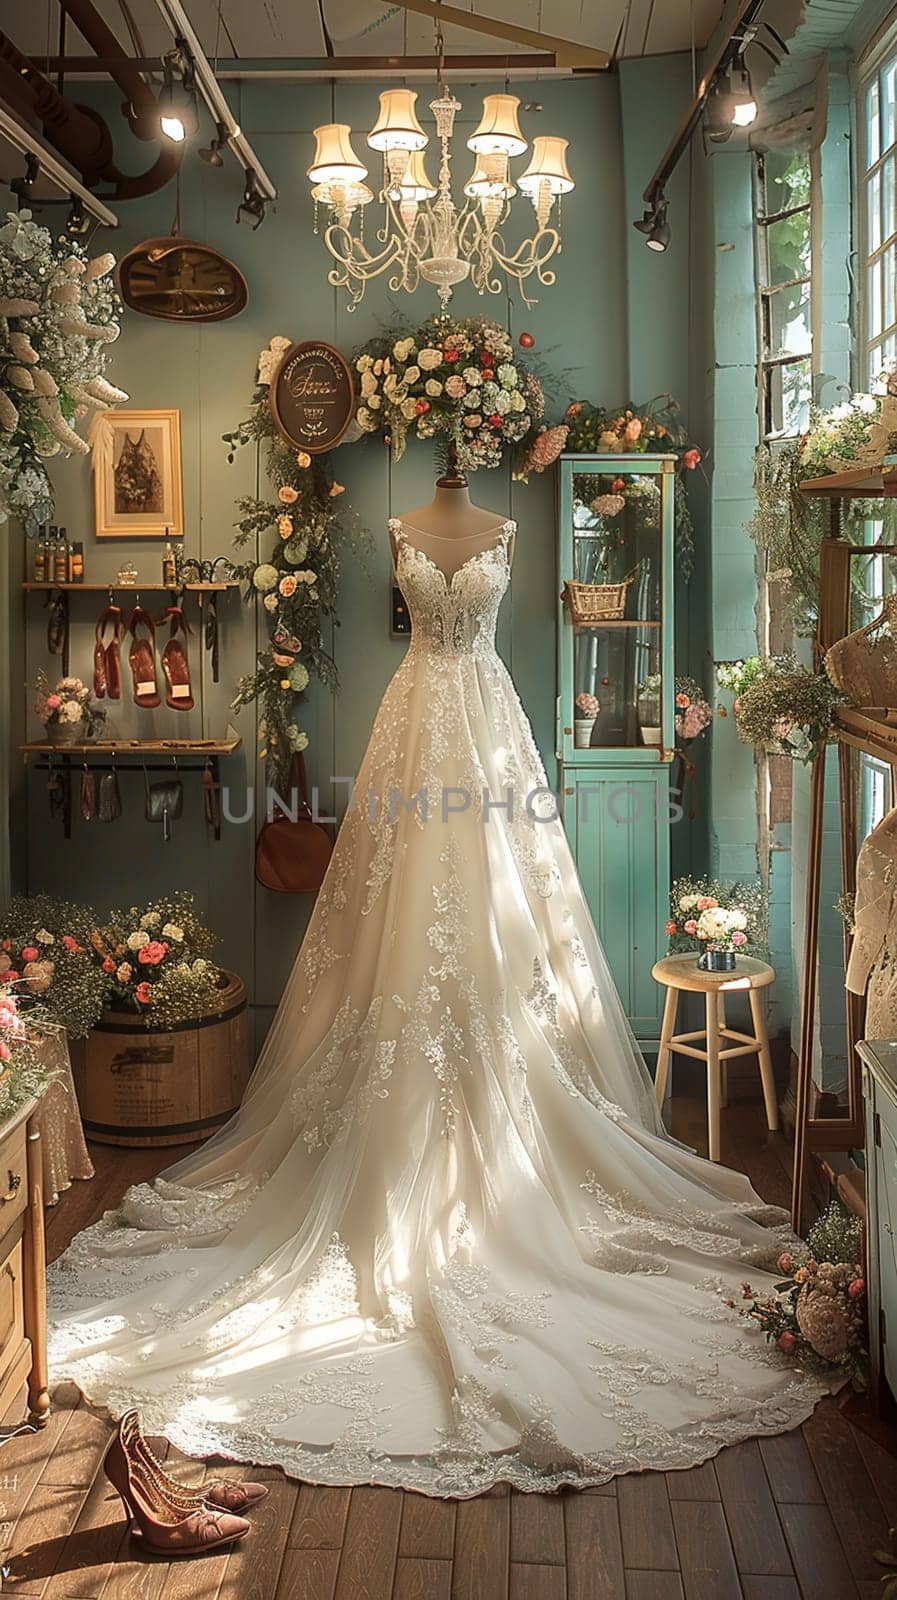 Elegant Bridal Boutique with Soft Focus on Gowns and Accessories, The hazy outlines of wedding attire suggest dreams and preparations for a special day.